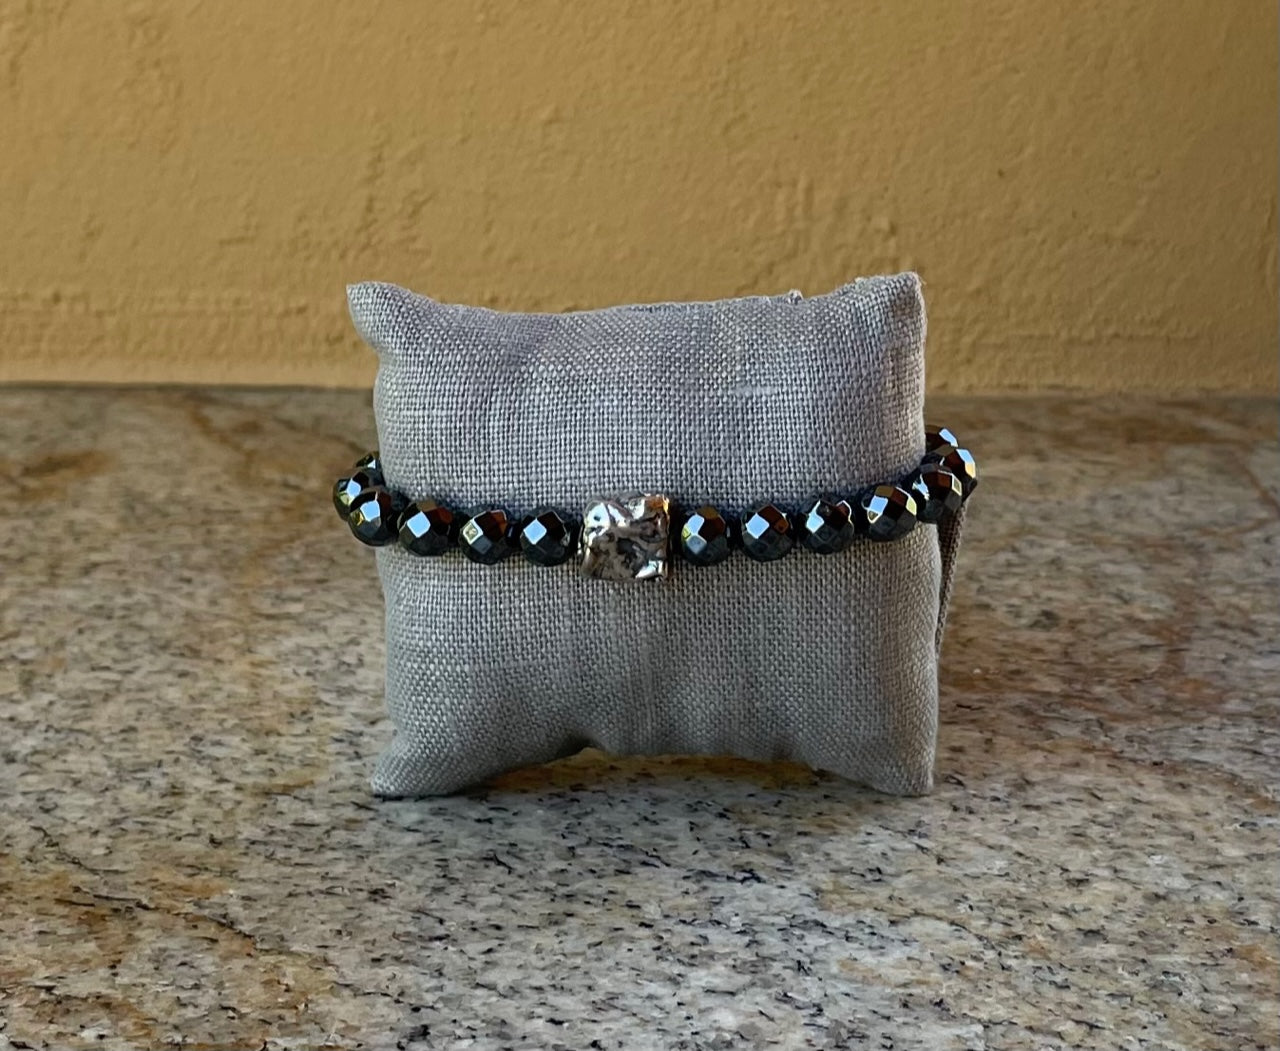 Bracelet - Faceted hematite with 4 oxidized sterling silver nuggets